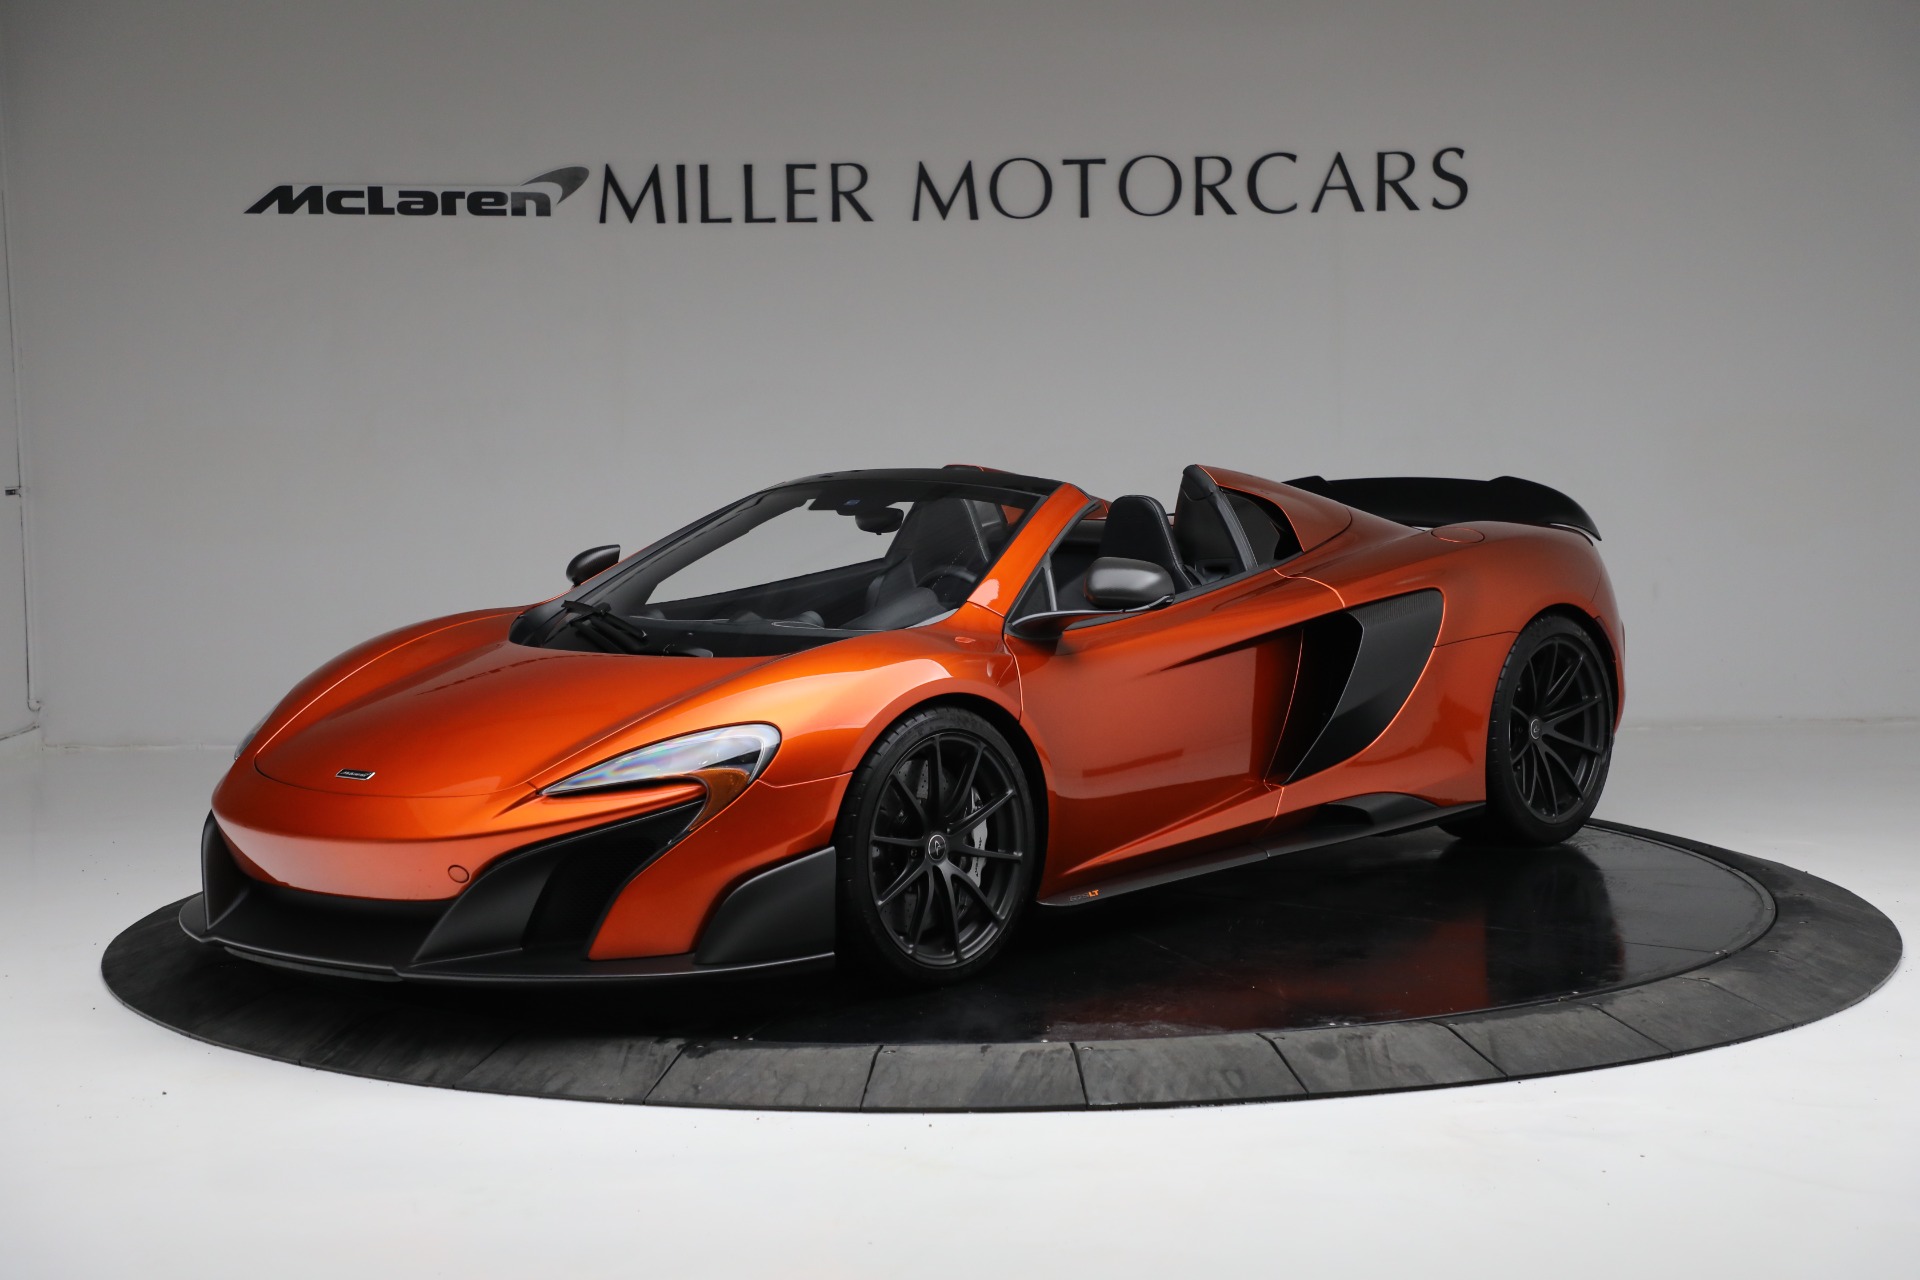 Used 2016 McLaren 675LT Spider for sale $284,900 at Aston Martin of Greenwich in Greenwich CT 06830 1